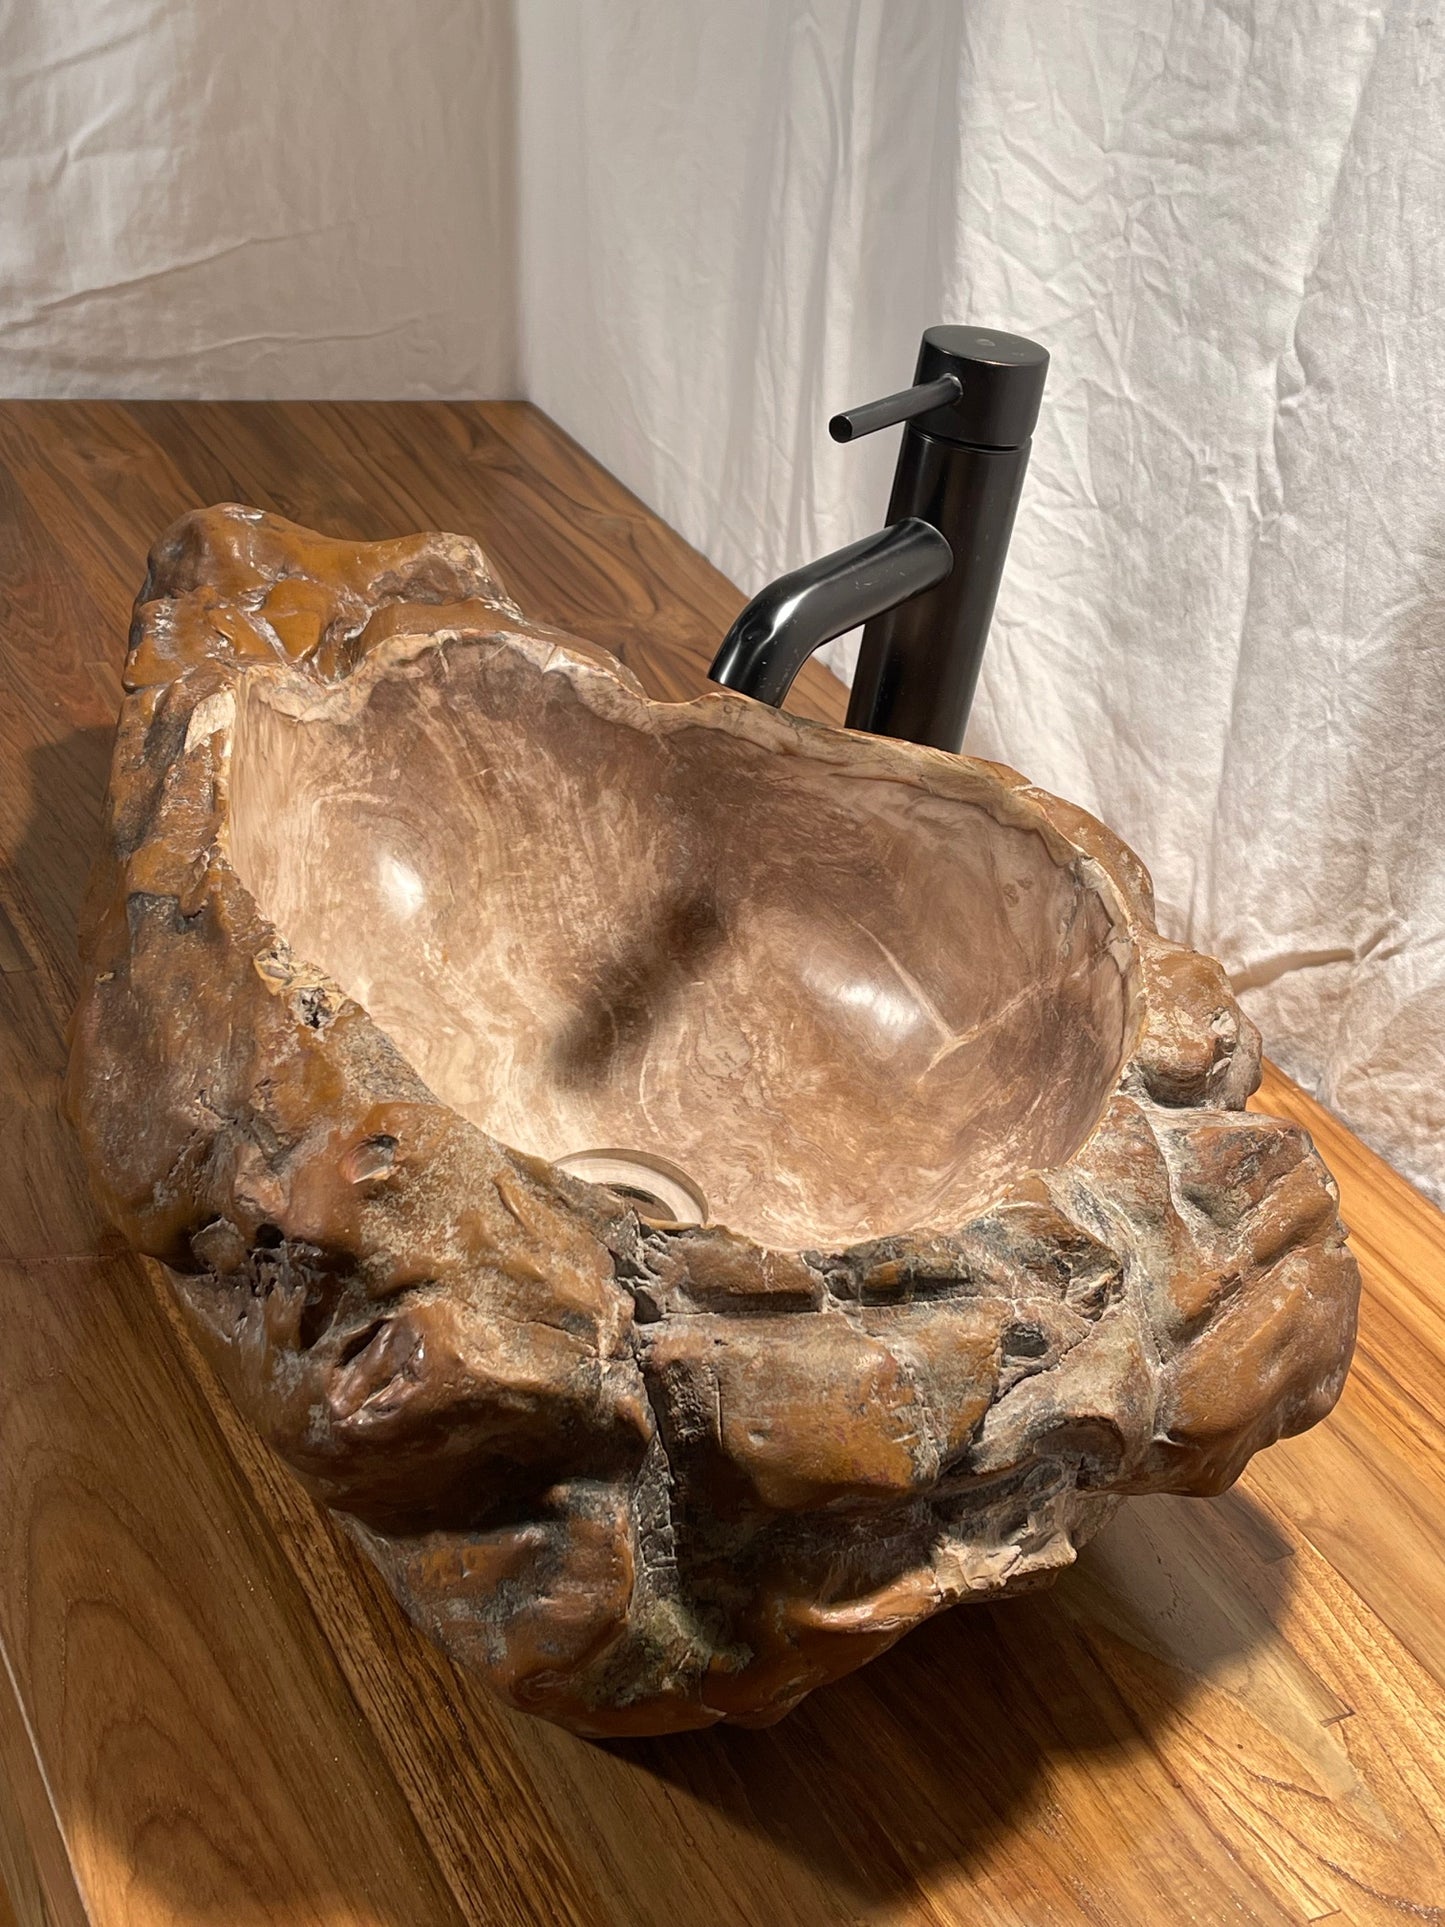 Log shaped petrified wood stone vessel sink with a textured but smooth brown exterior color at impact imports of Boise, Idaho